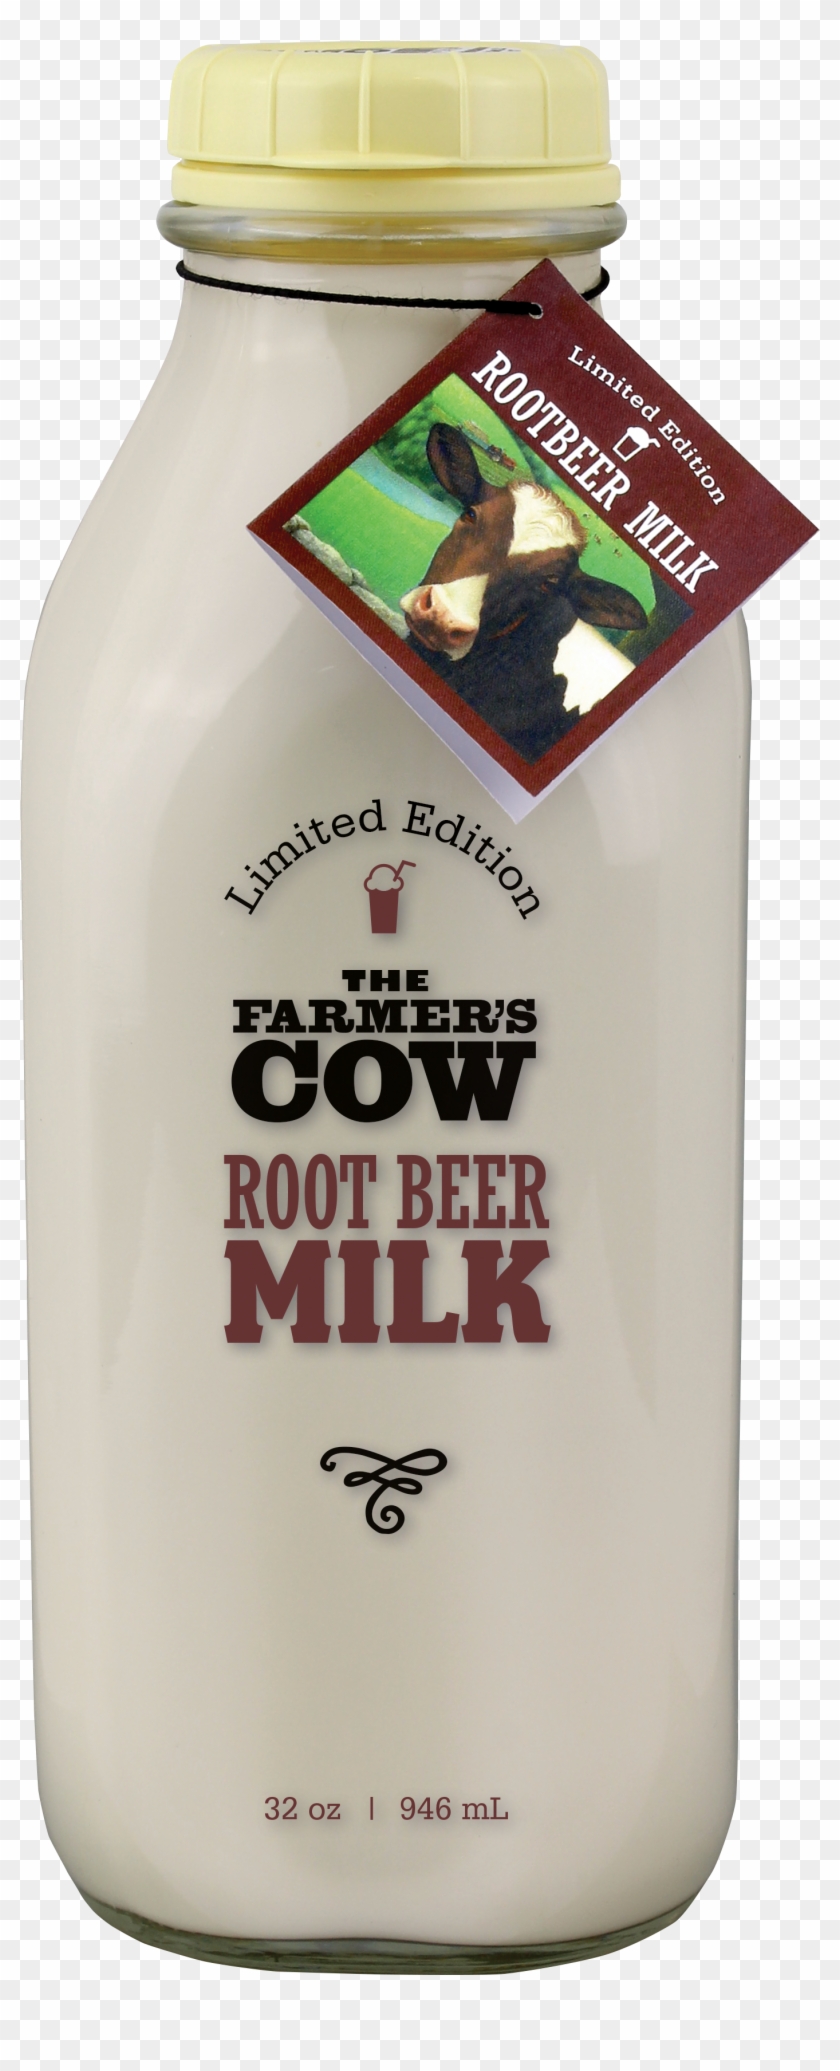 The Farmer's Cow Limited Edition Root Beer Milk, 12 - Farmers Cow Root Beer Milk Clipart #754364